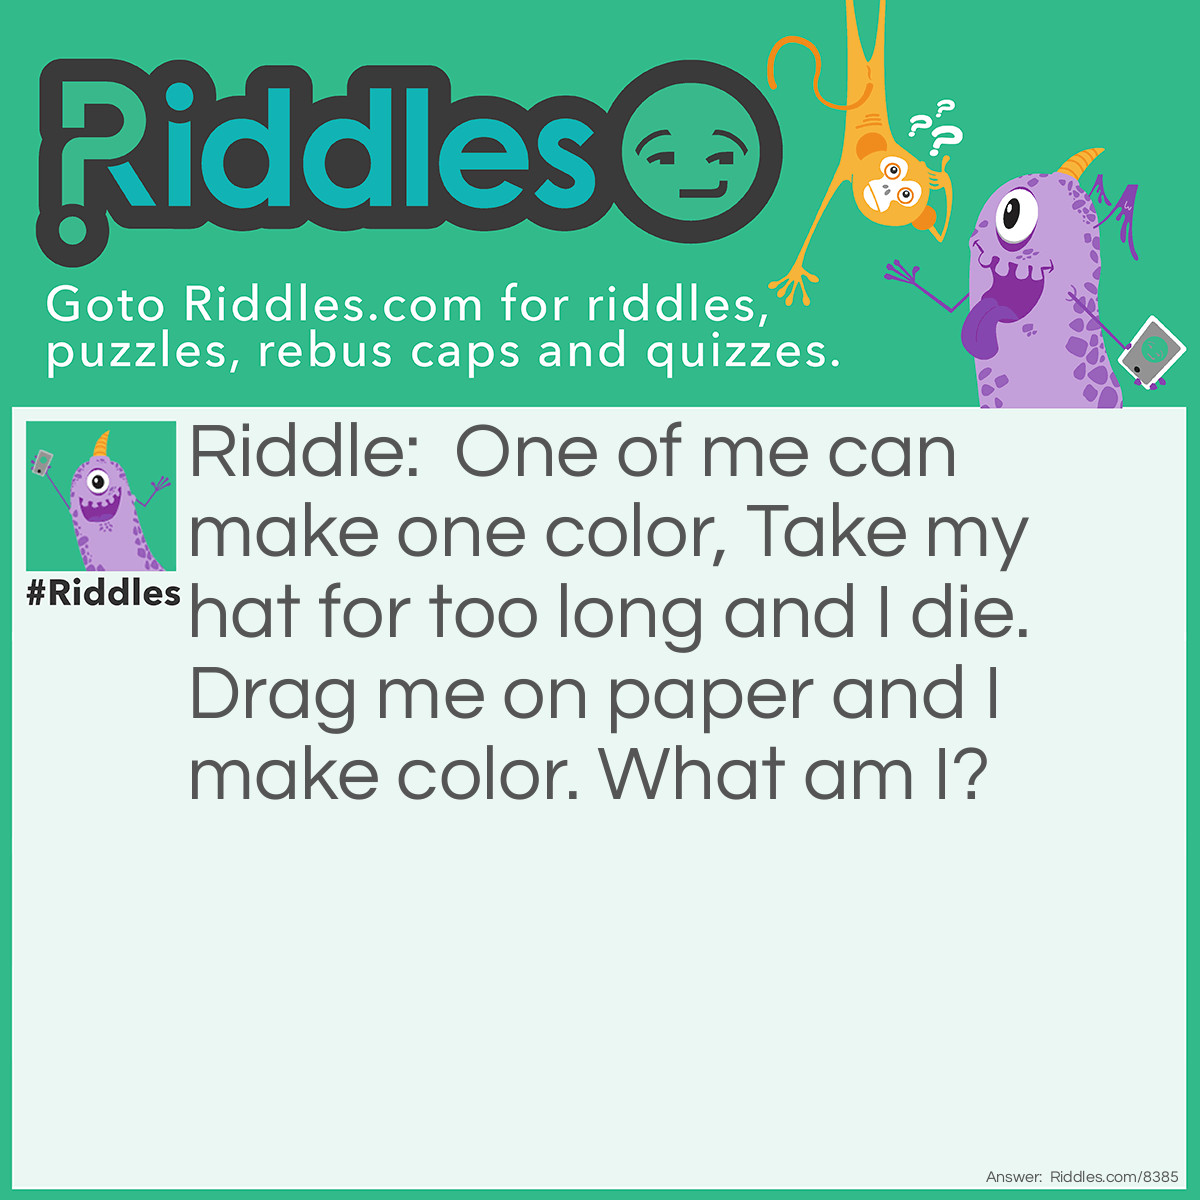 Riddle: One of me can make one color, Take my hat for too long and I die. Drag me on paper and I make color. What am I? Answer: A marker.